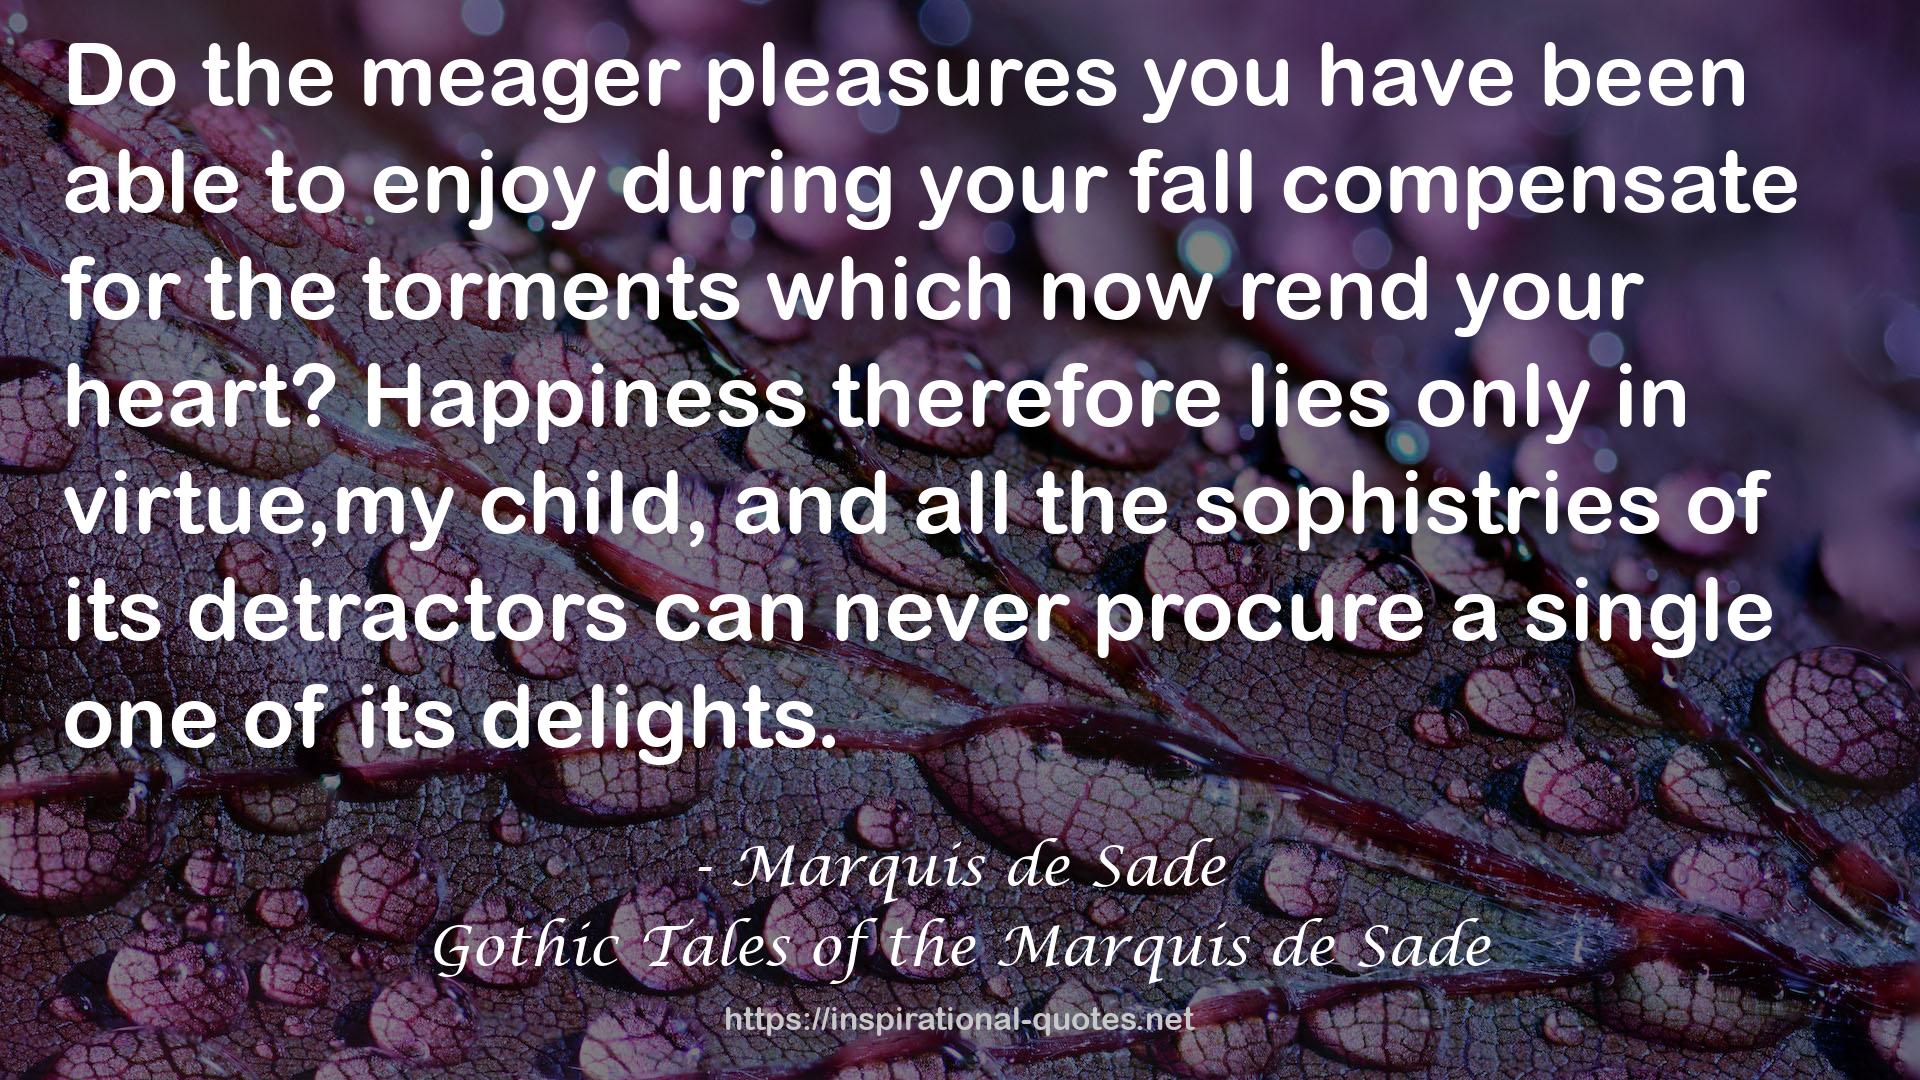 the meager pleasures  QUOTES